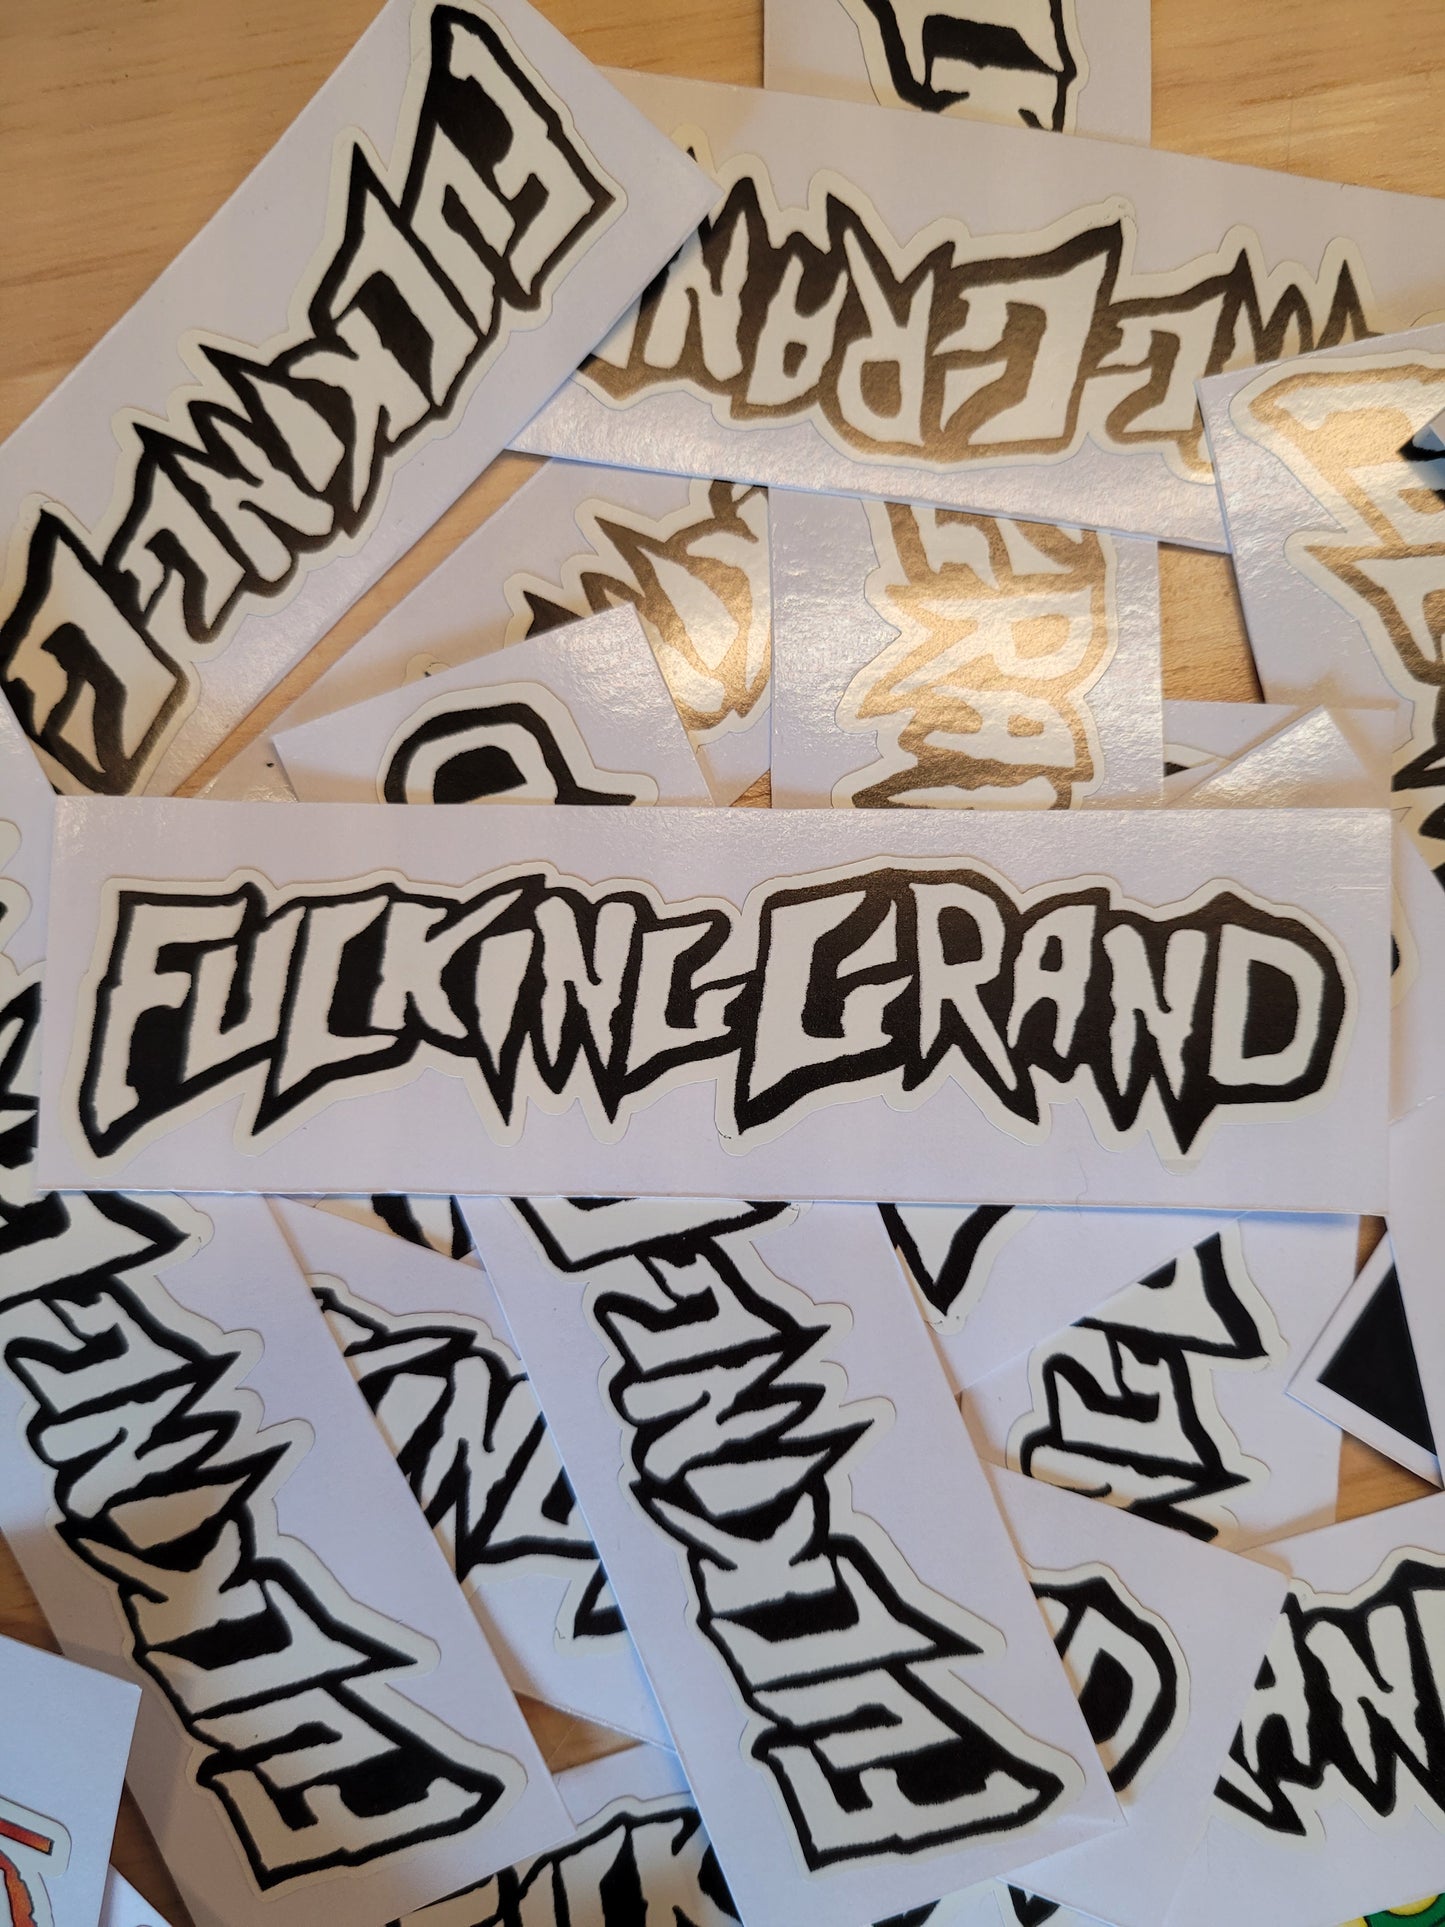 Grand River Stickers - Effing Grand